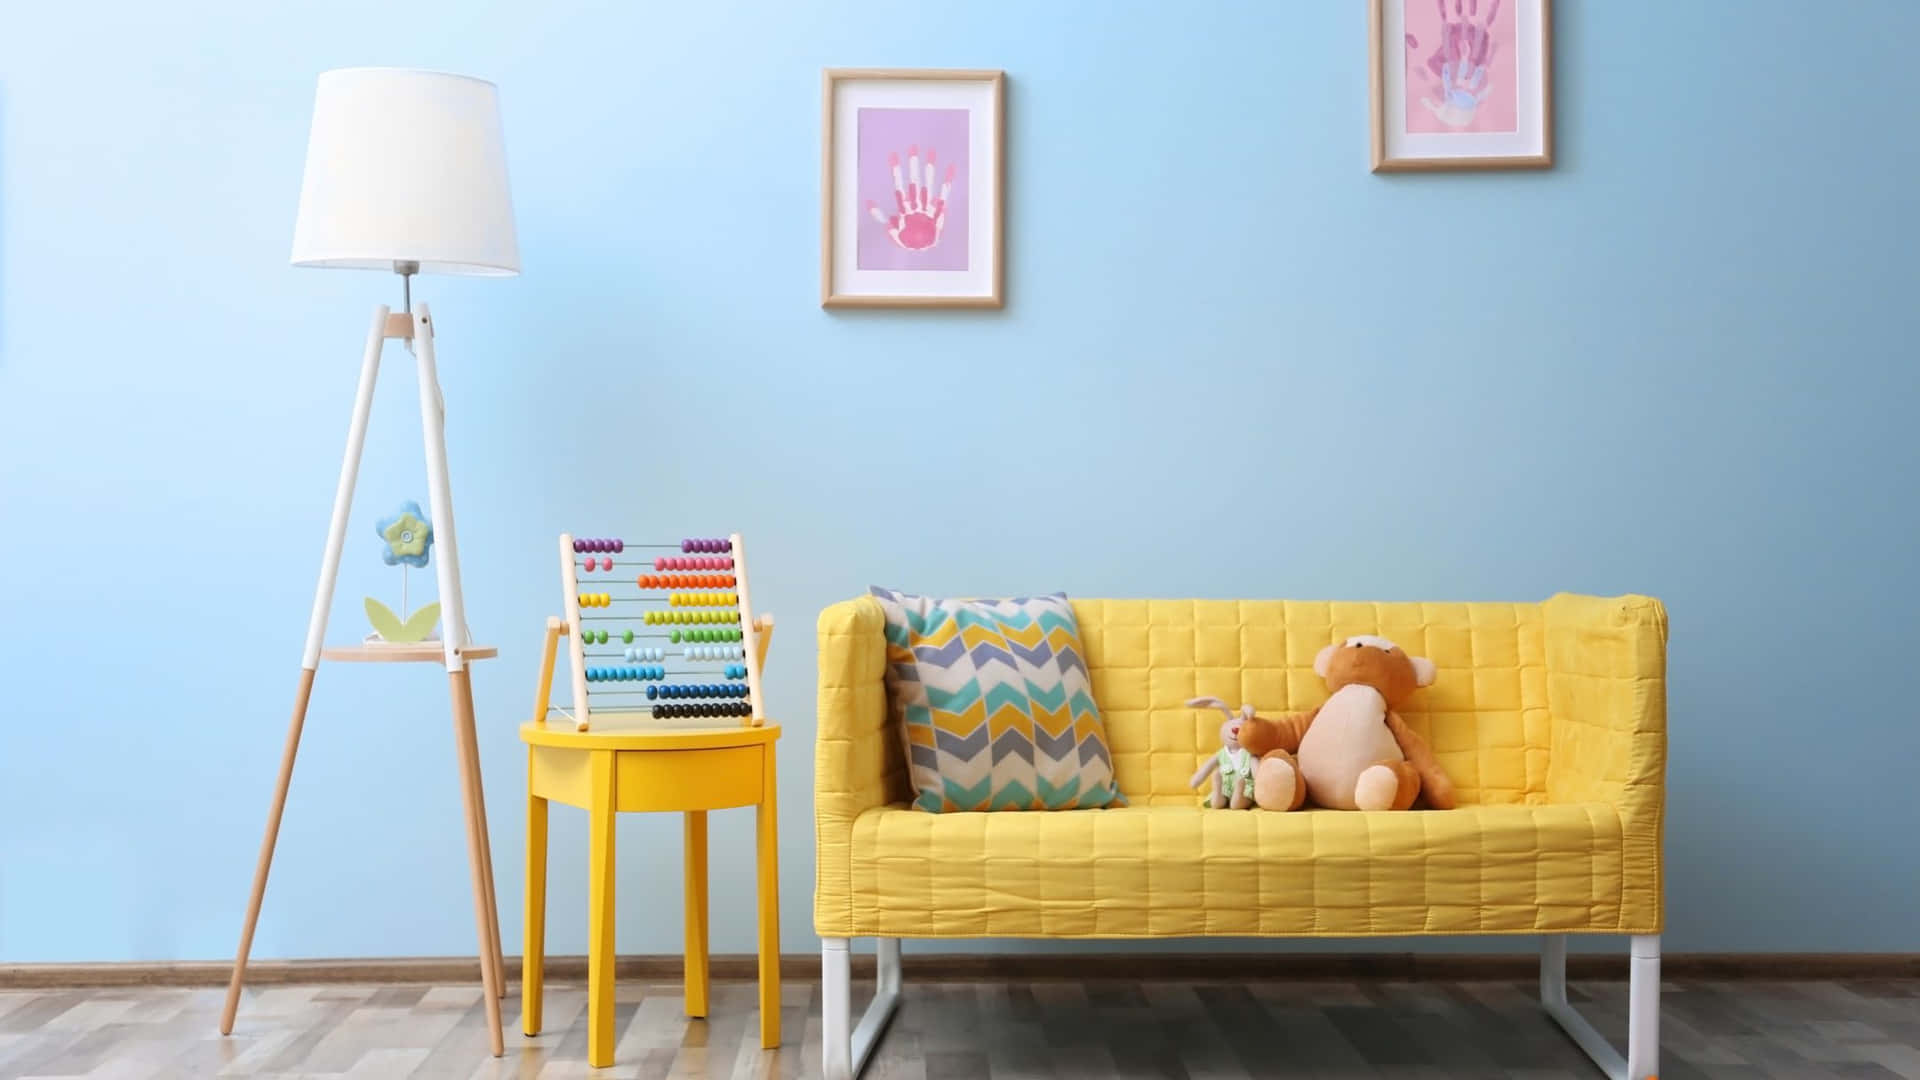 A Yellow Couch And A Stuffed Animal In A Room With Blue Walls